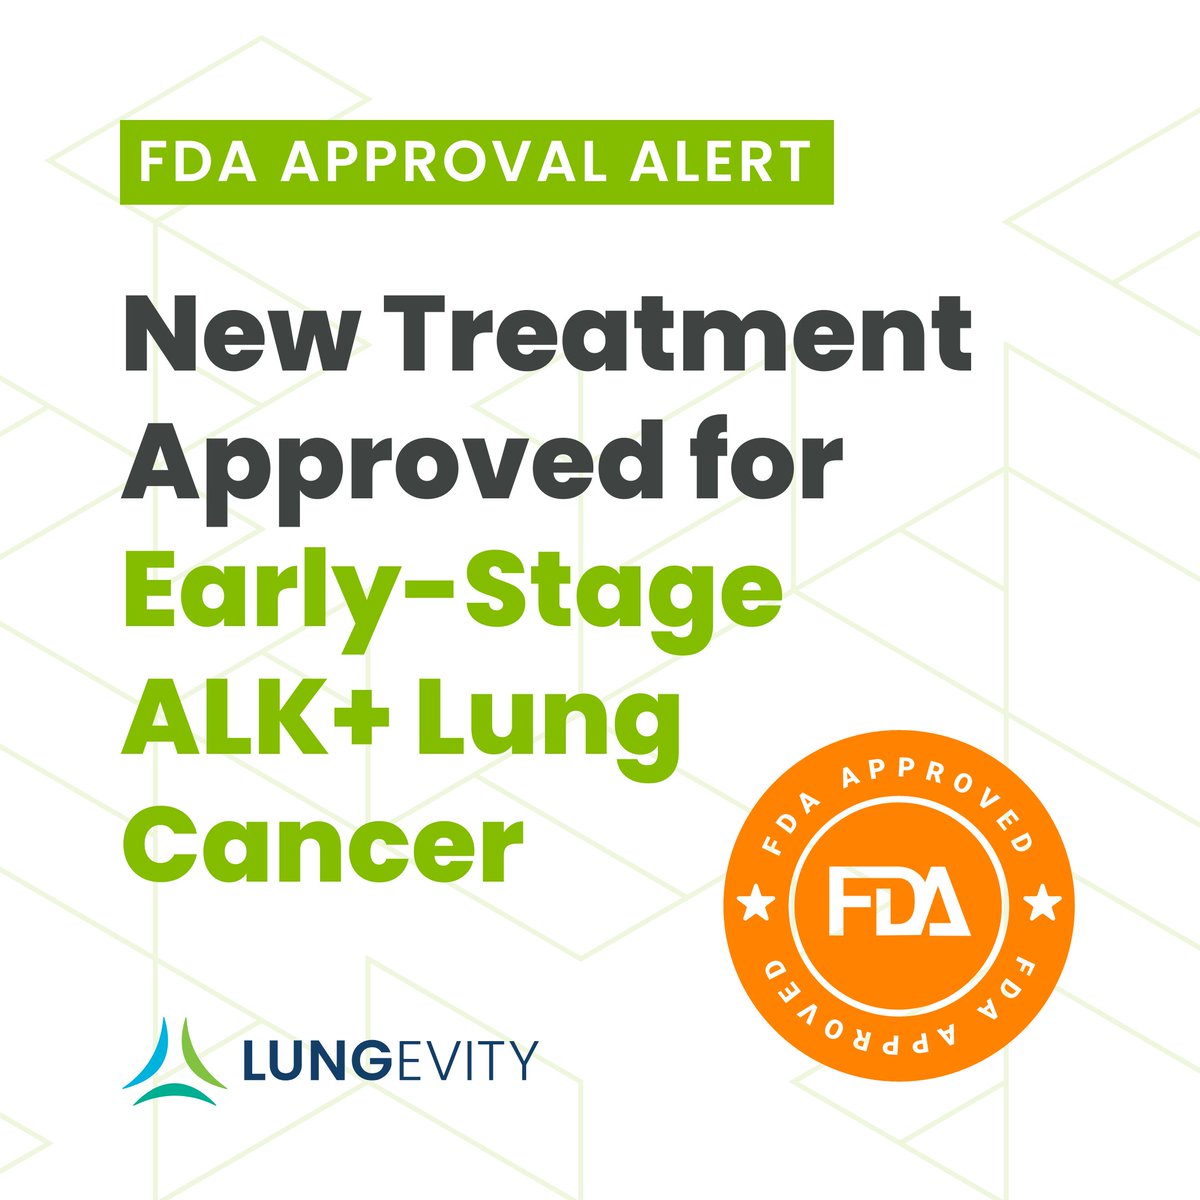 New Treatment Approved for Early-Stage ALK+ #LungCancer. 

#Alectinib is now approved to treat patients after surgical removal of ALK-positive non-small cell lung cancer (NSCLC). Learn more by visiting the ALK+ Lung Cancer Patient Gateway: bit.ly/3UvK6zW #lcsm